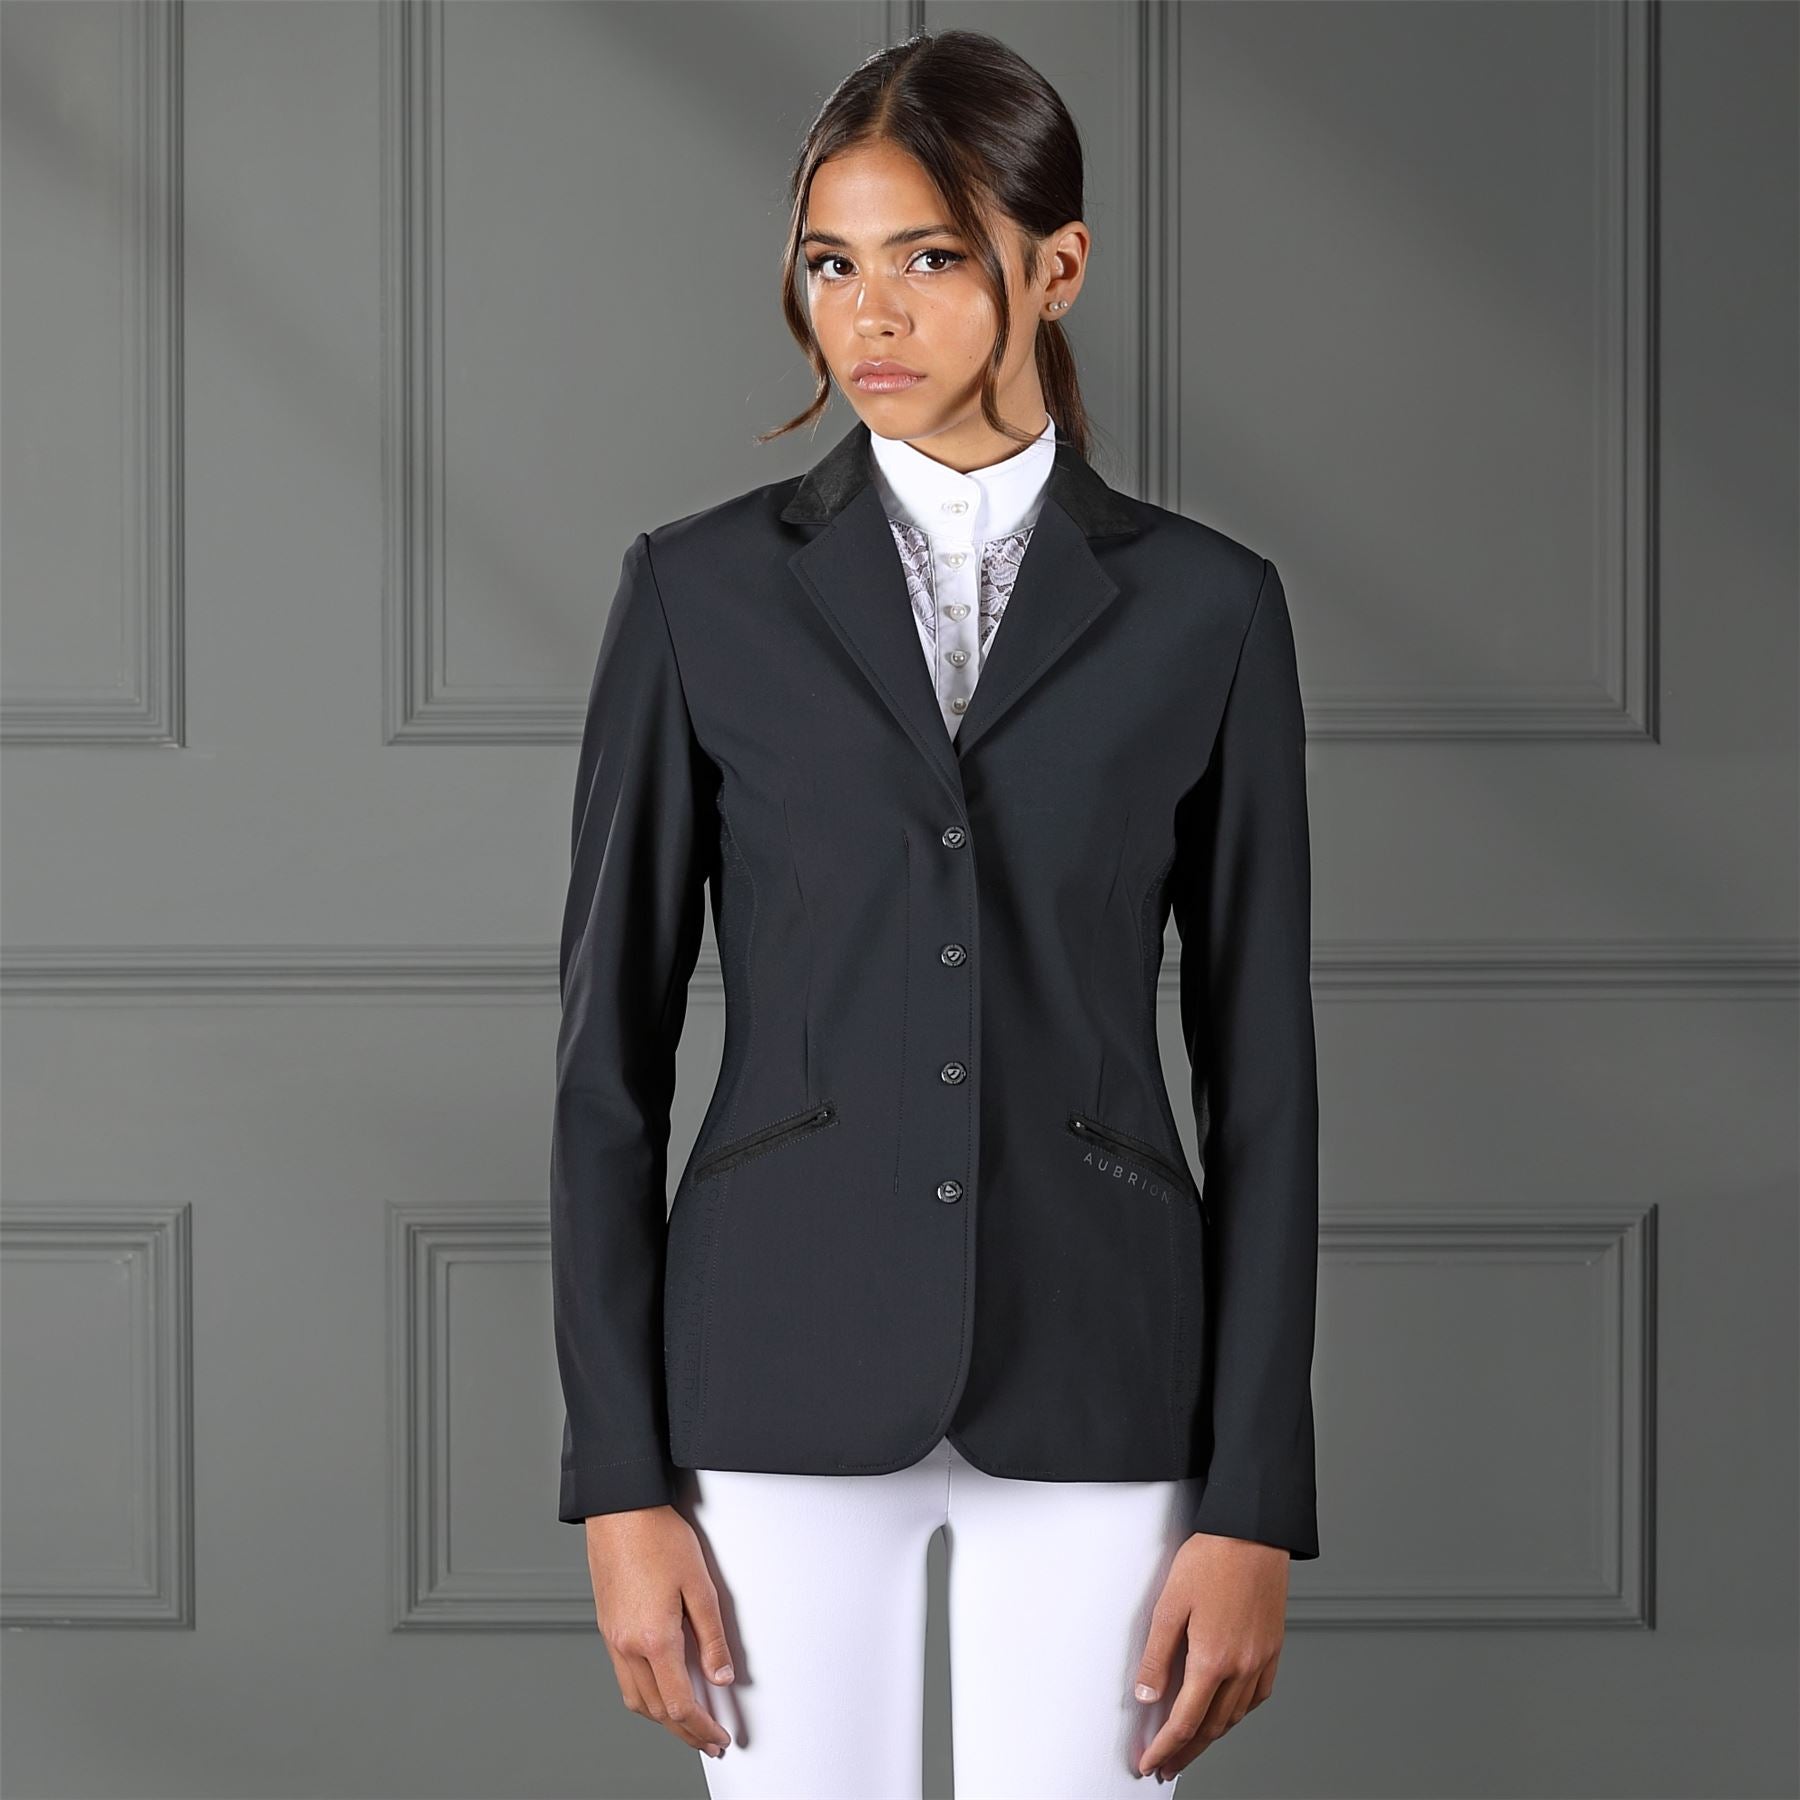 Aubrion Bolton Show Jacket - Just Horse Riders